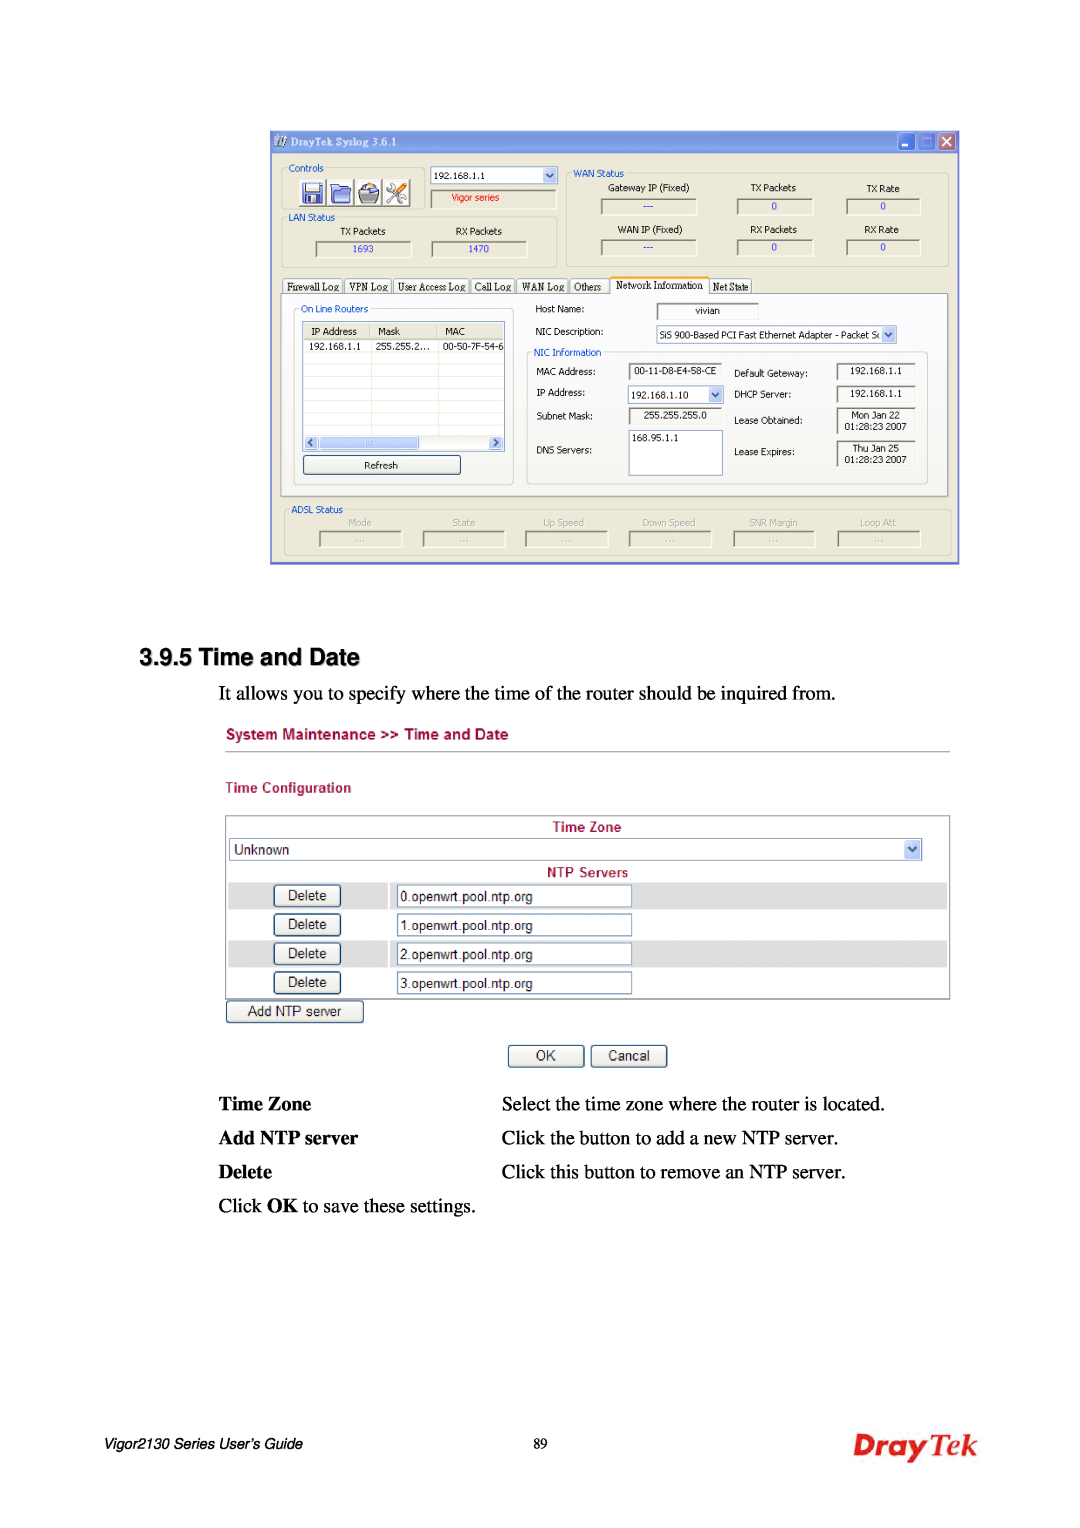 Draytek manual Time and Date, Select the time zone where the router is located, Vigor2130 Series User’s Guide 